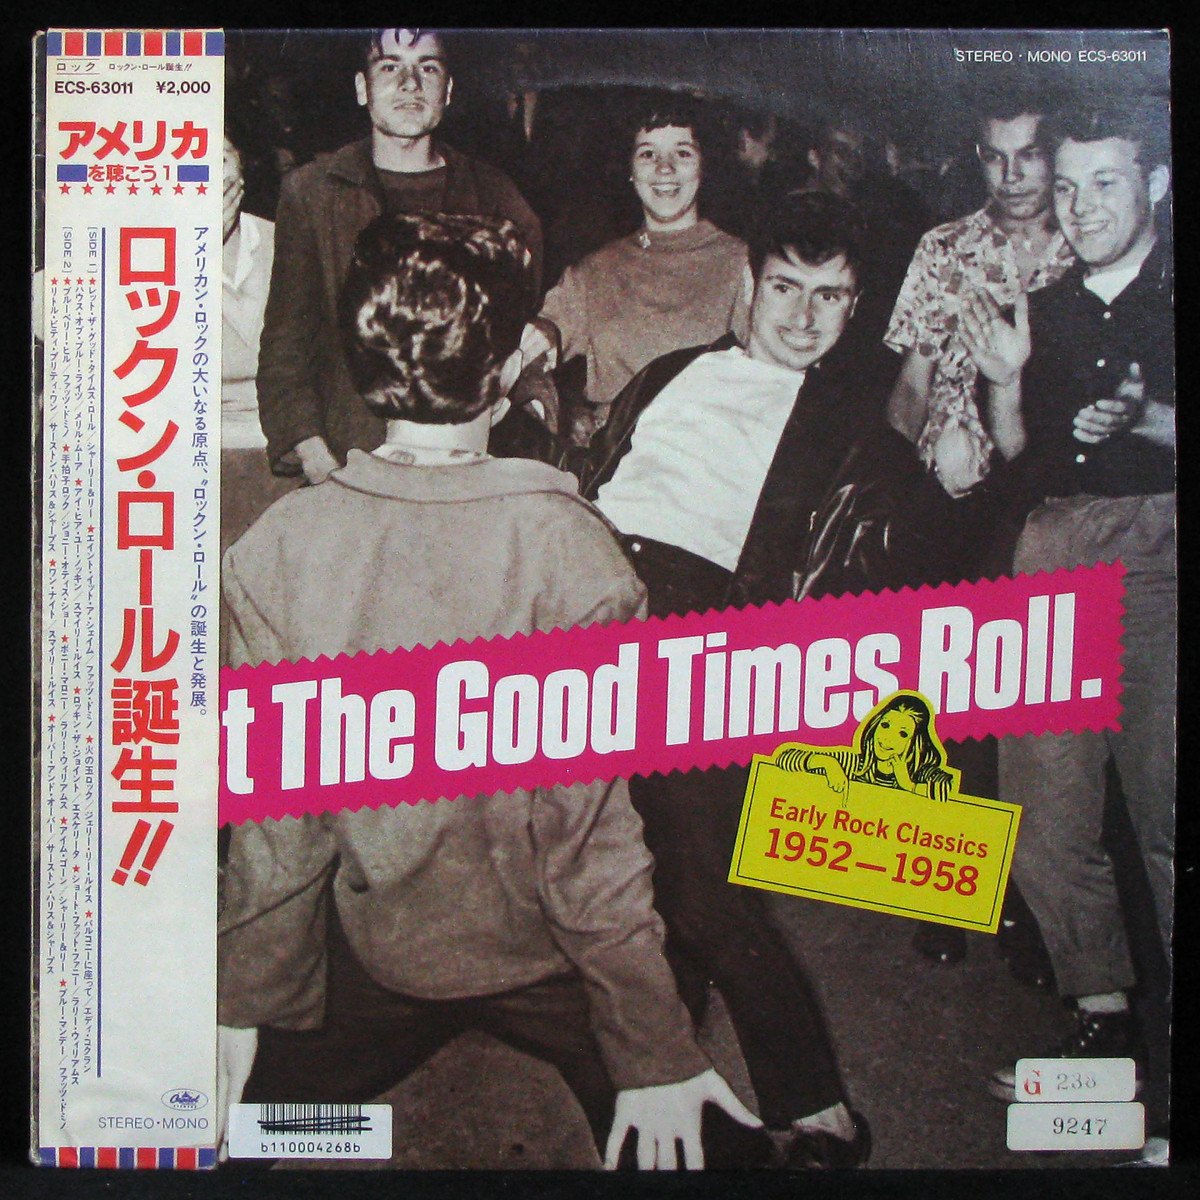 Let The Good Times Roll - Early Rock Classics 1952-1958